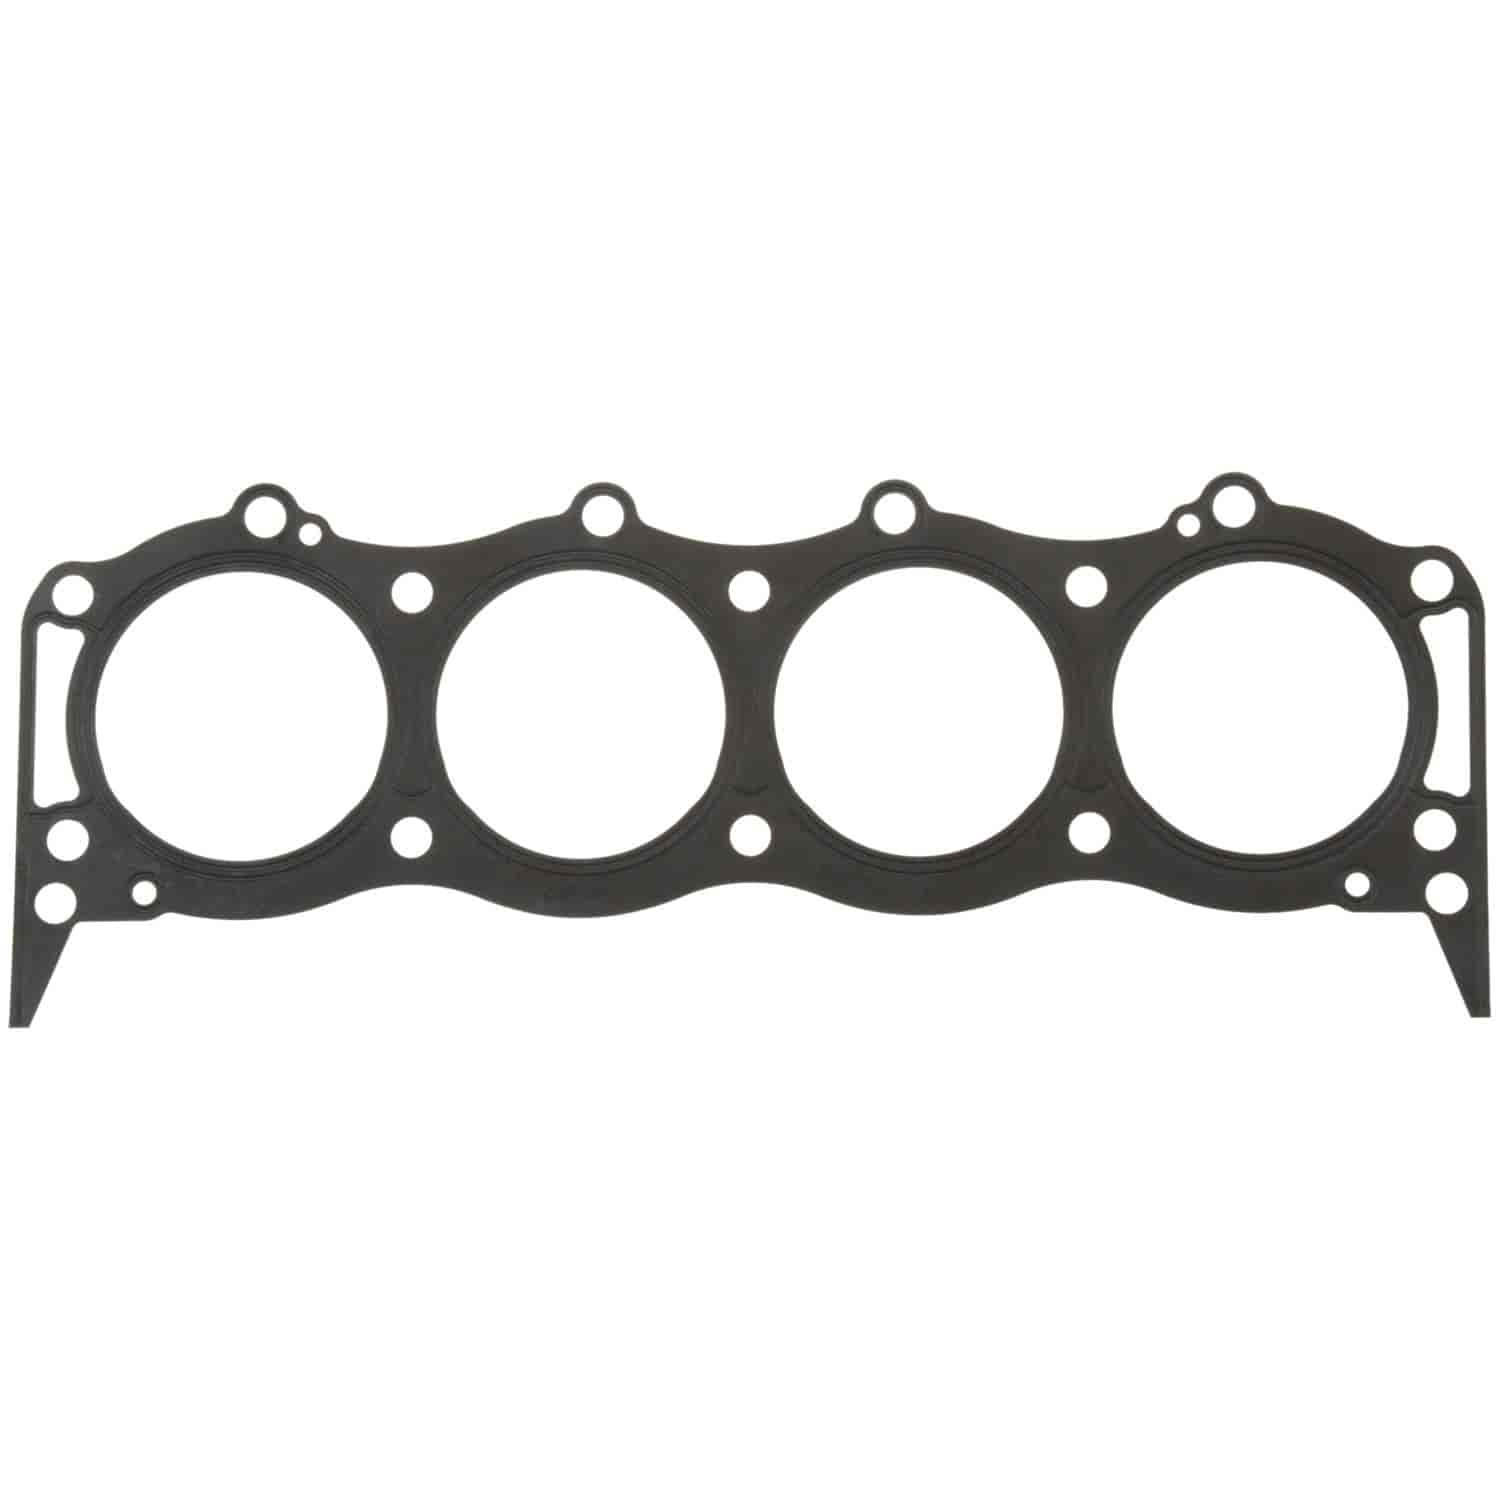 Cylinder Head Gasket Land Rover Applications. 1990-1994 3.9L Range Rover Applications